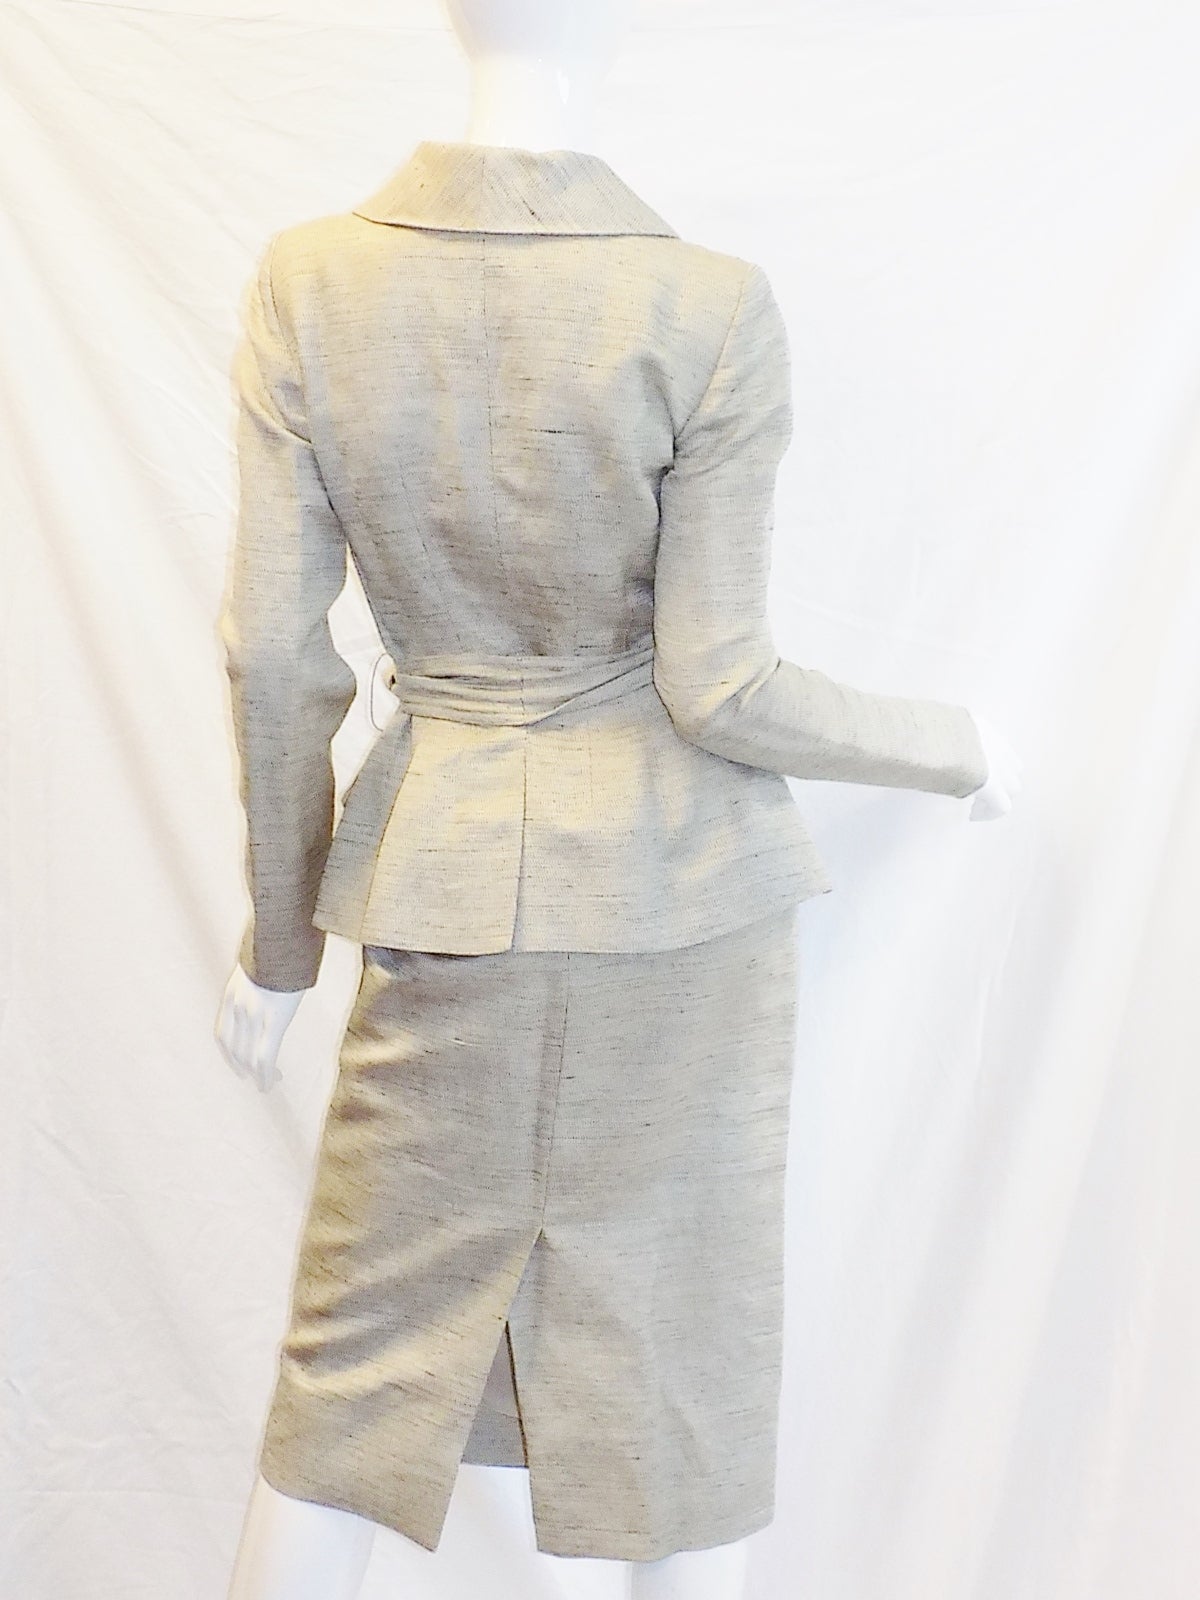 New and absolutely a must have for that powerful executive sharp woman. Raw silk all silk lined. Fitted jacket featuring shawl collar, soft belt and side snap closure. Midi pencil skirt. Cut and fitted to perfection. This suit is showroom sample.